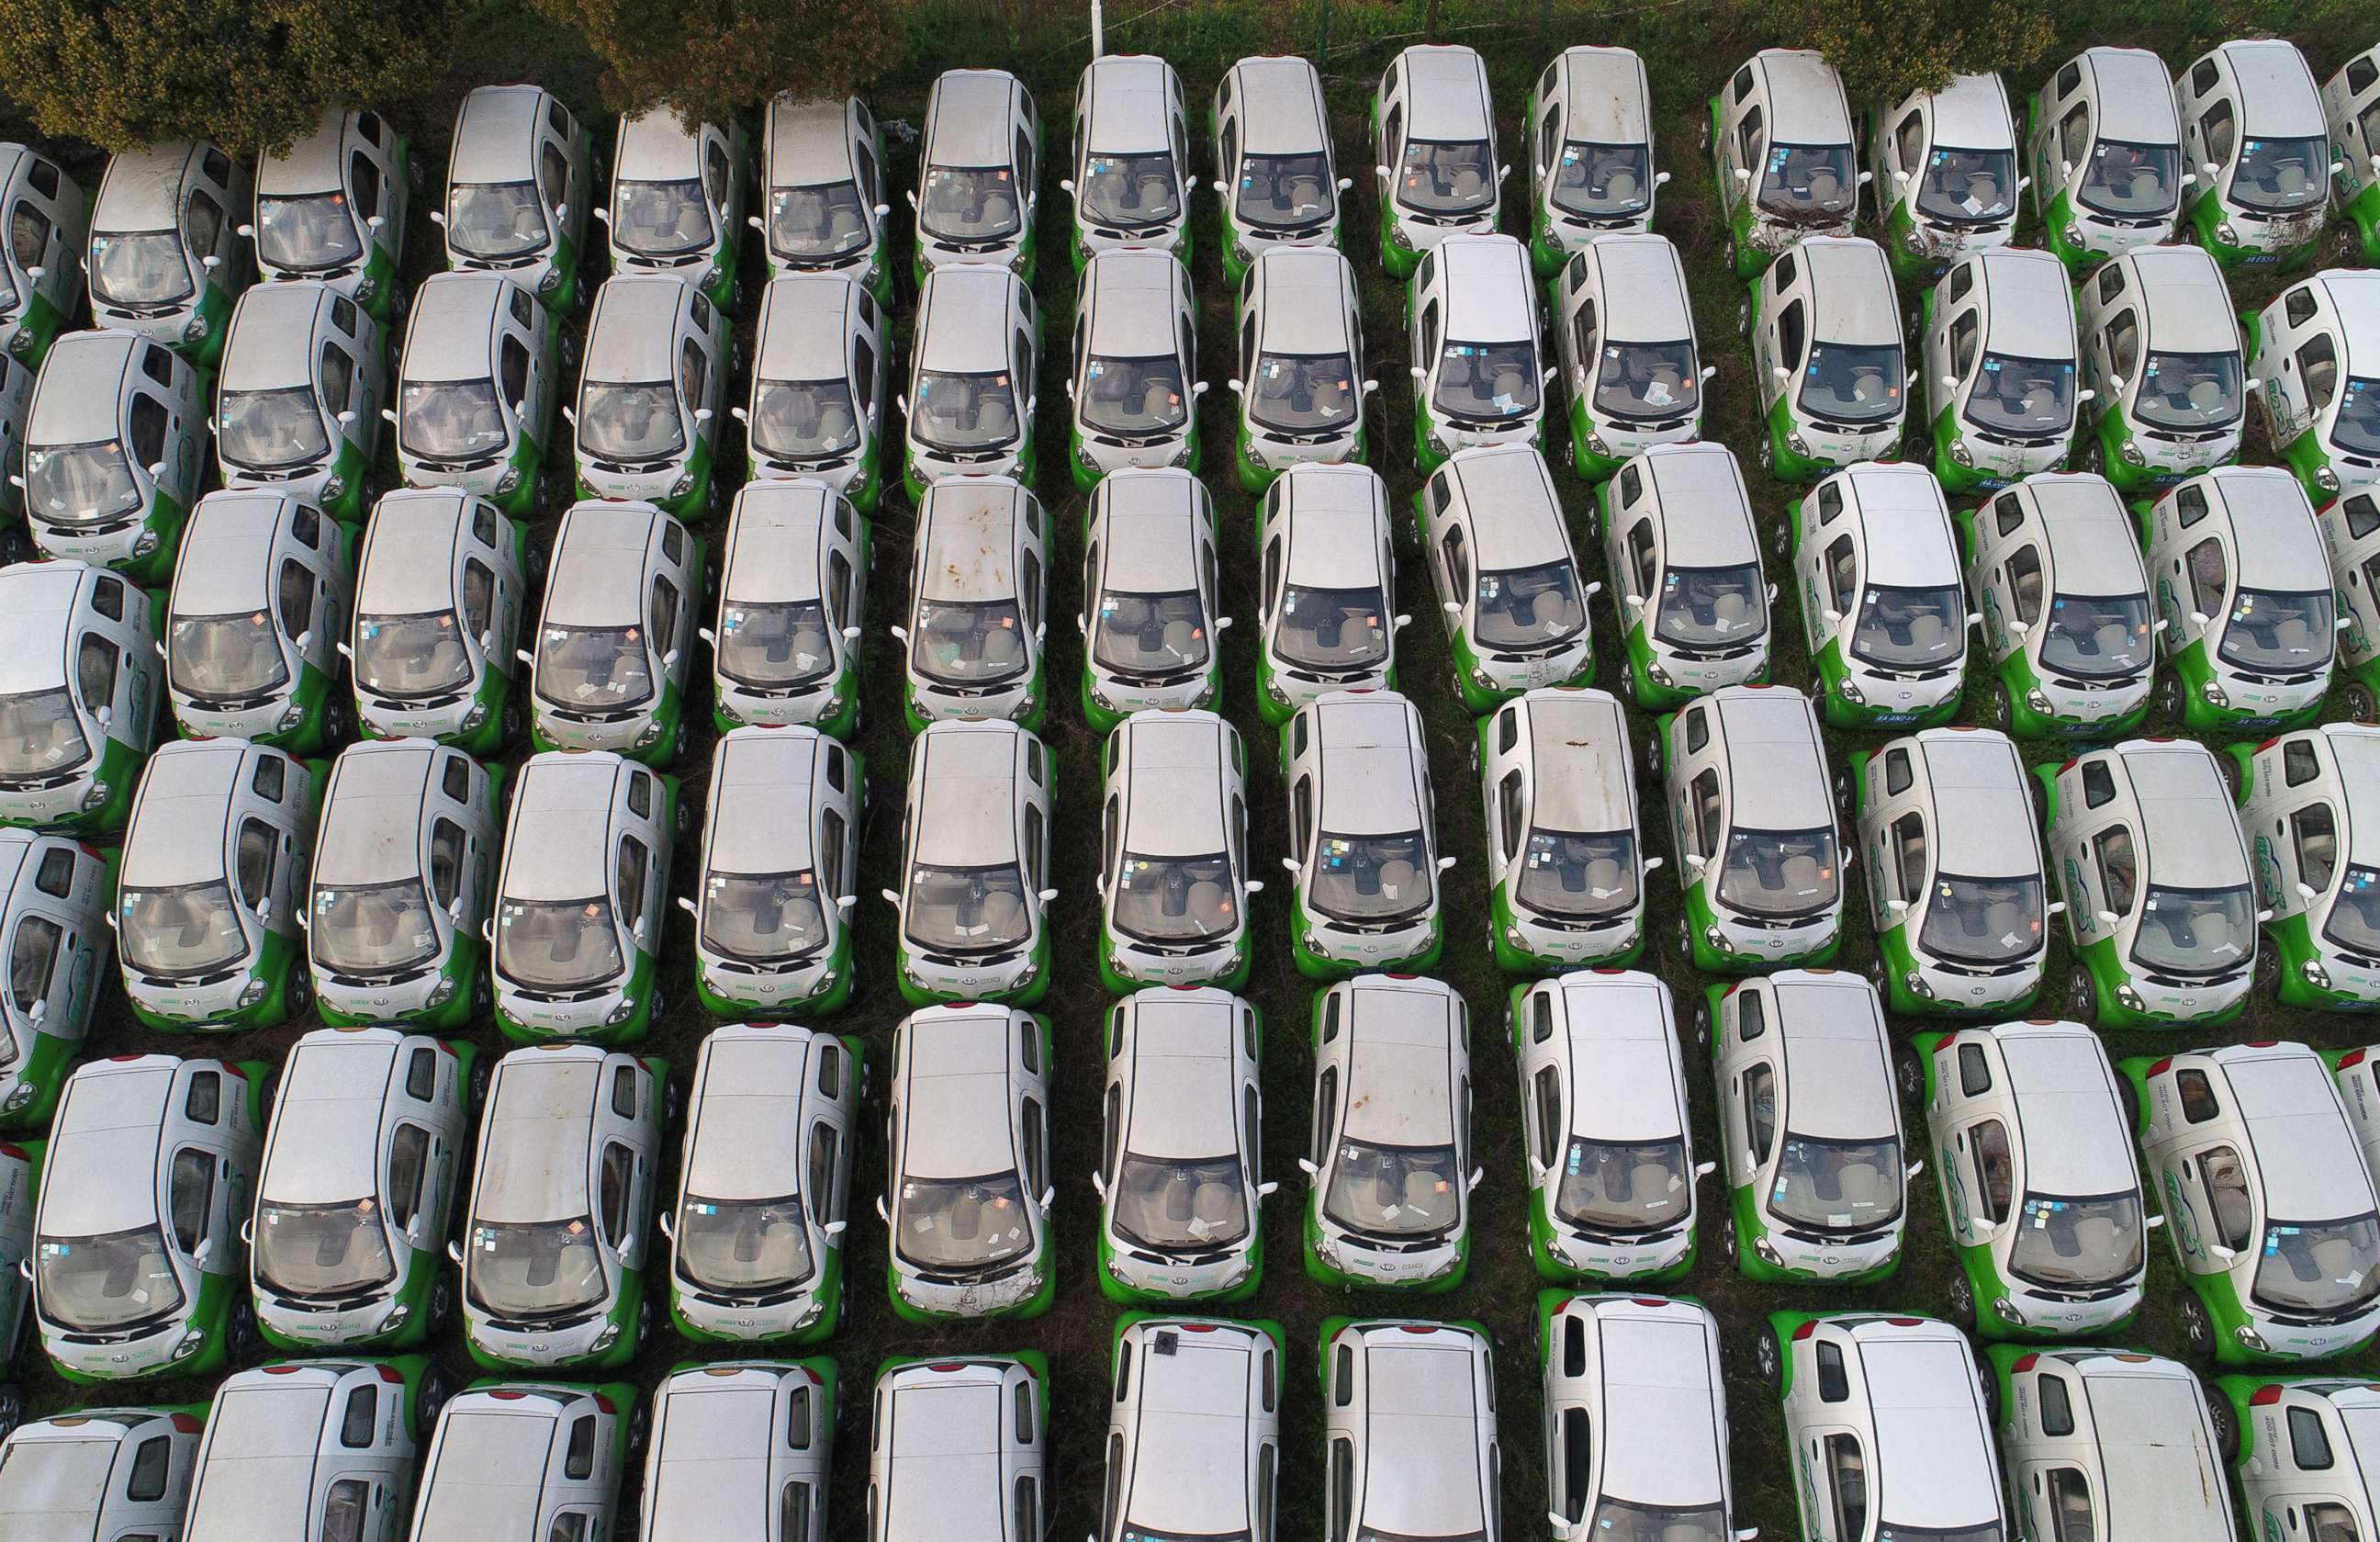 PHOTO: Aerial view of shared electric cars at a parking lot by the Qiantang River on March 23, 2019 in Hangzhou, China.